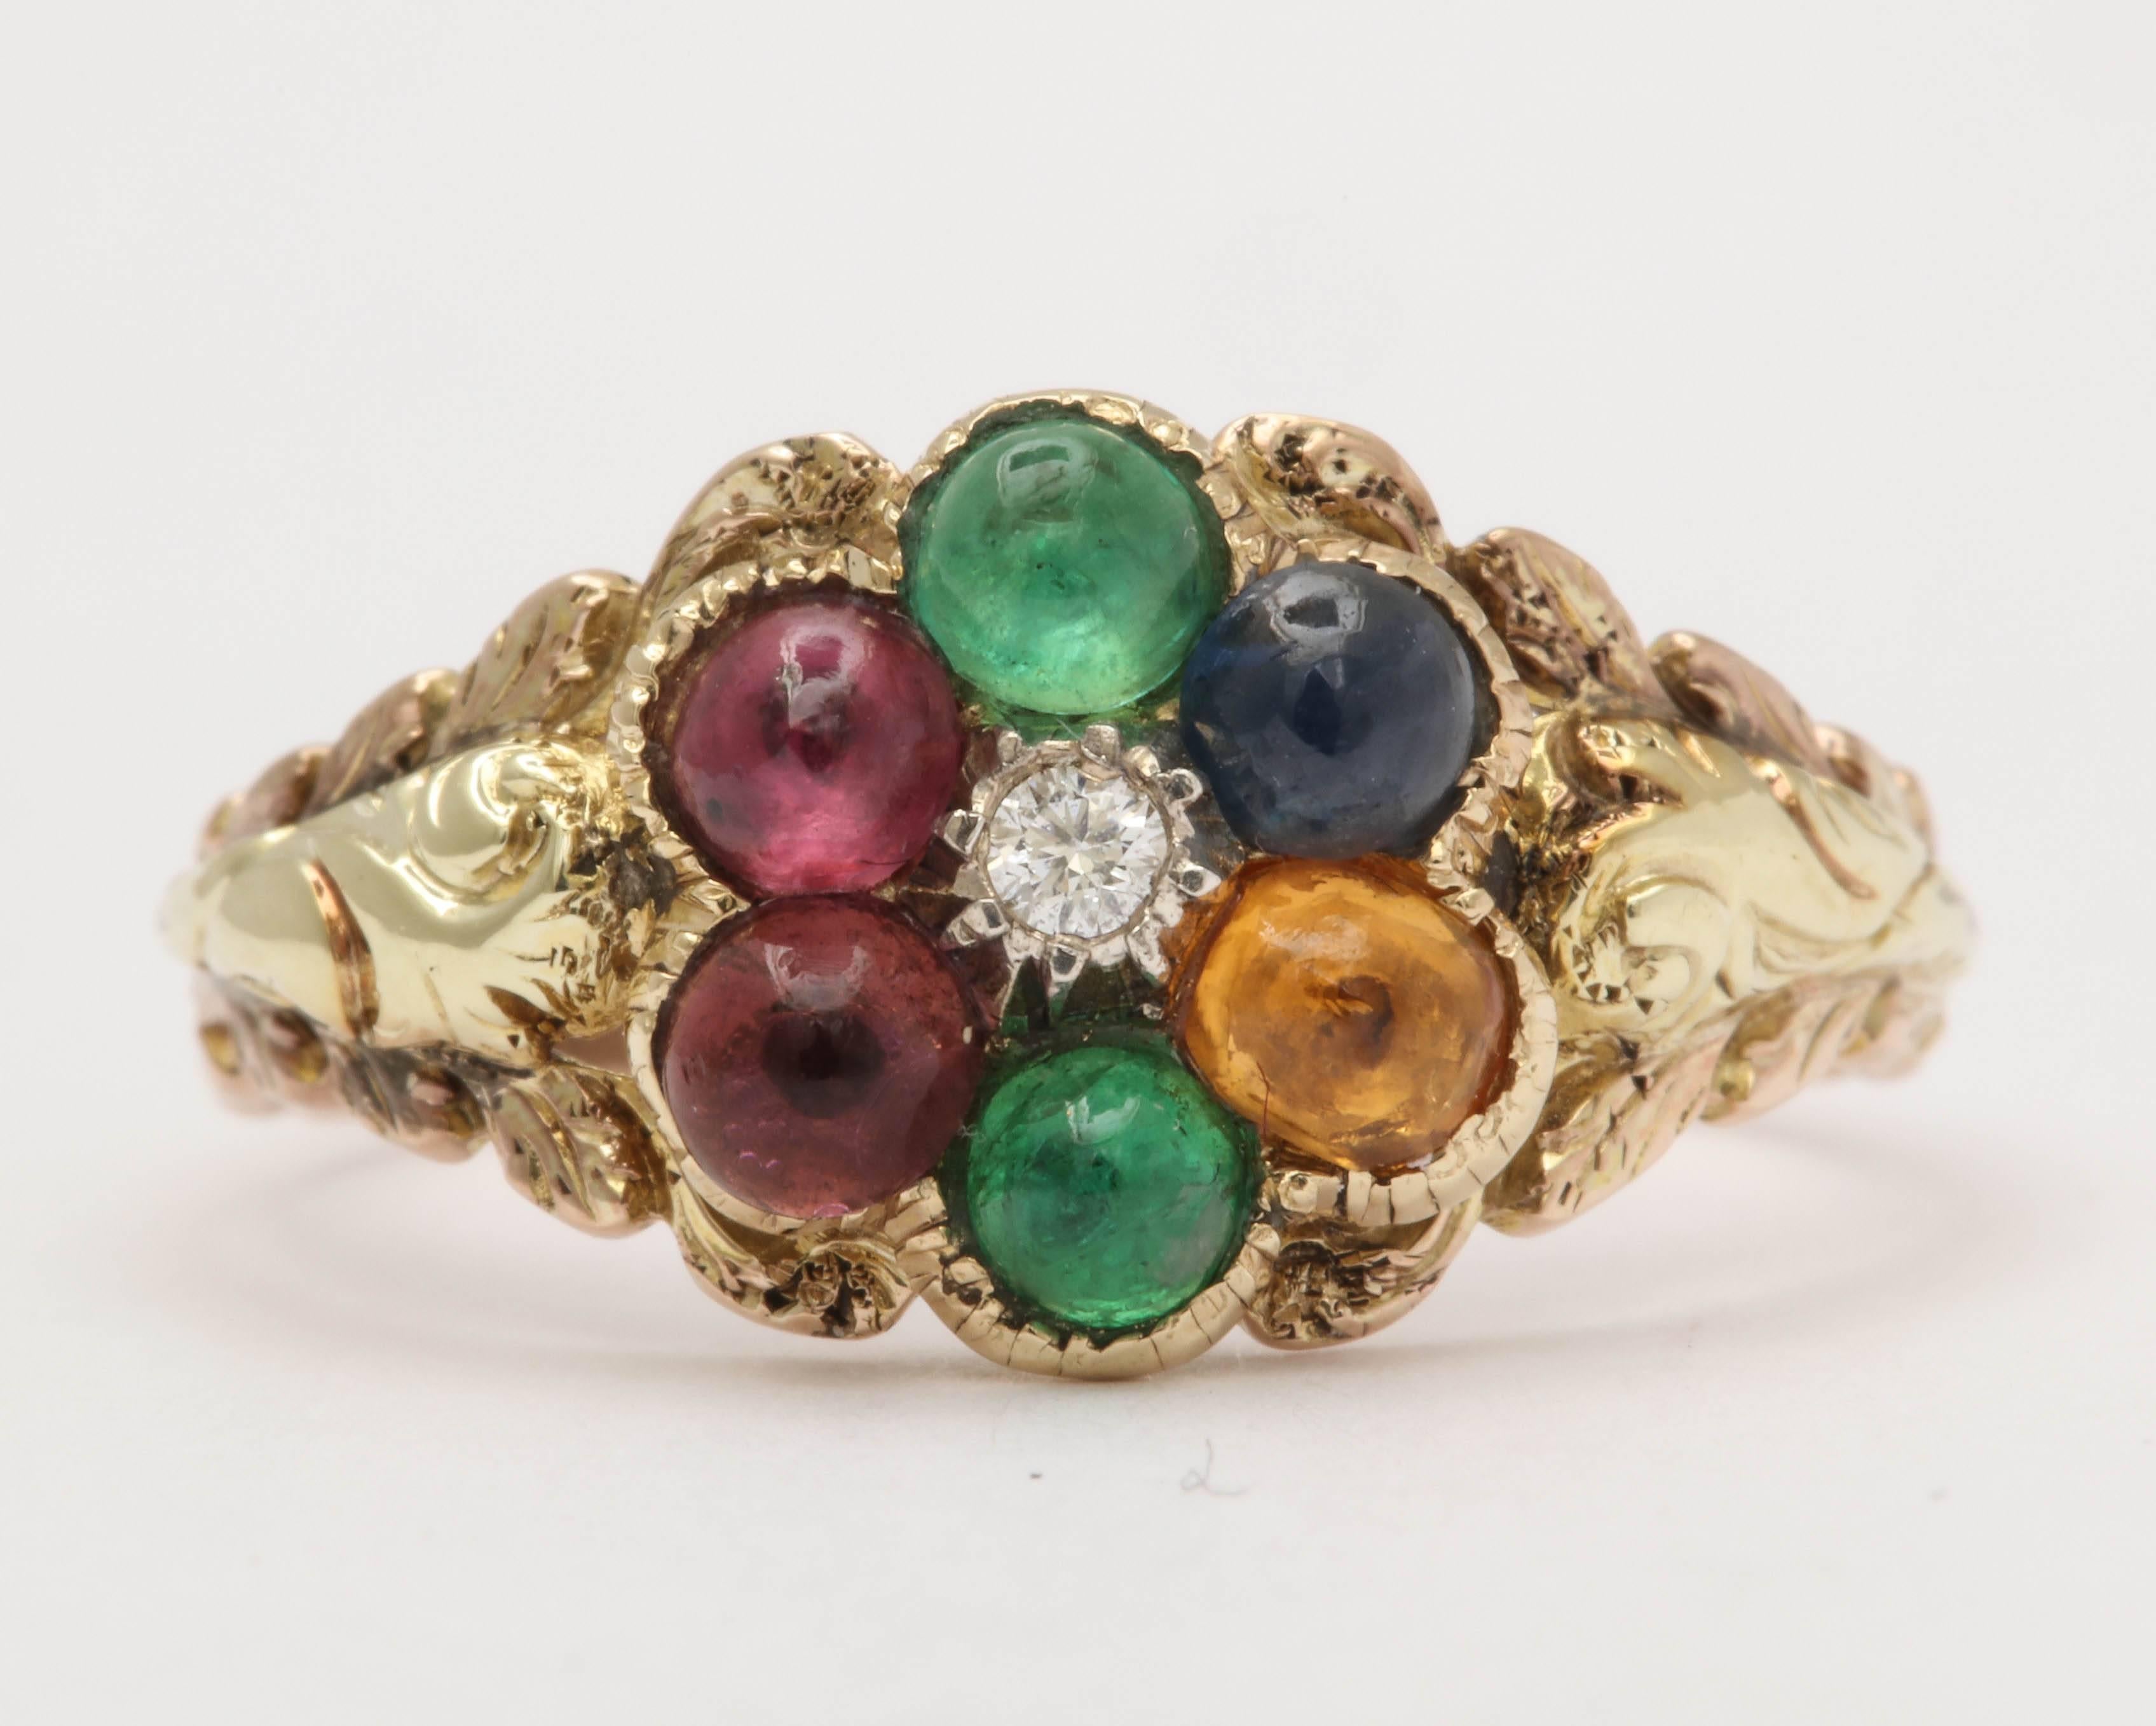 The absolute best of its kind-cabochon stones with diamond center cluster. The stones spell out the word dearest using a diamond, emerald, amethyst, ruby, emerald, sapphire, and tourmaline. The ring has a locket back which would have likely held